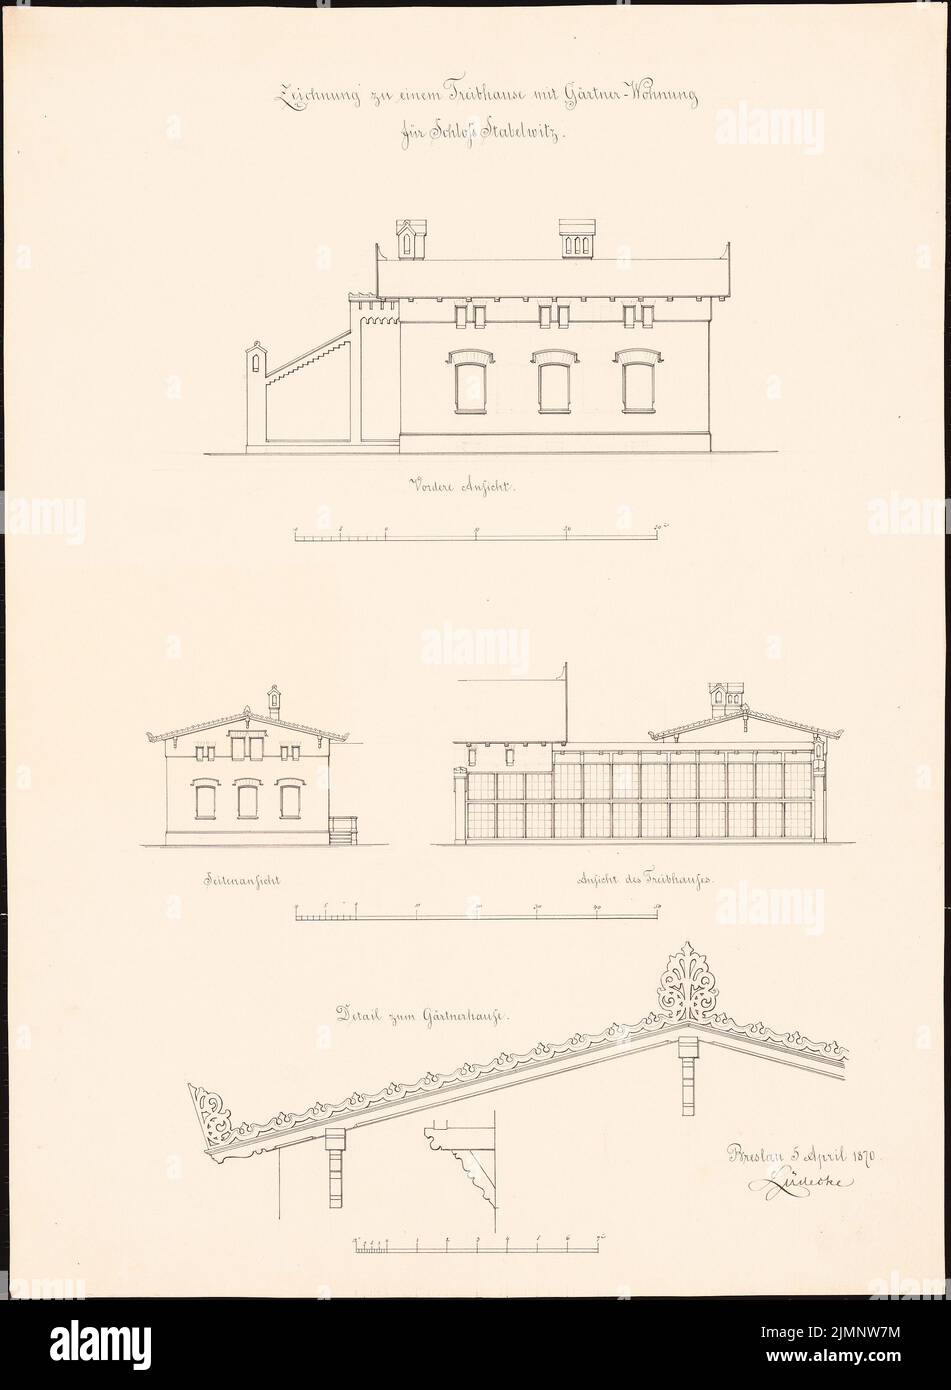 Lüdecke Carl Johann Bogislaw (1826-1894), Castle in Stabelwitz. Greenhouse with gardener apartment - 1st draft (05.04.1870): 3 tort: front view, side view, view of the greenhouse, detail gable of the gardener house, 3 scale strips. Ink and pencil on cardboard, 56.2 x 41.1 cm (including scan edges) Lüdecke Carl Johann Bogislaw  (1826-1894): Schloss Stabelwitz. Treibhaus mit Gärtnerwohnung - 1. Entwurf Stock Photo